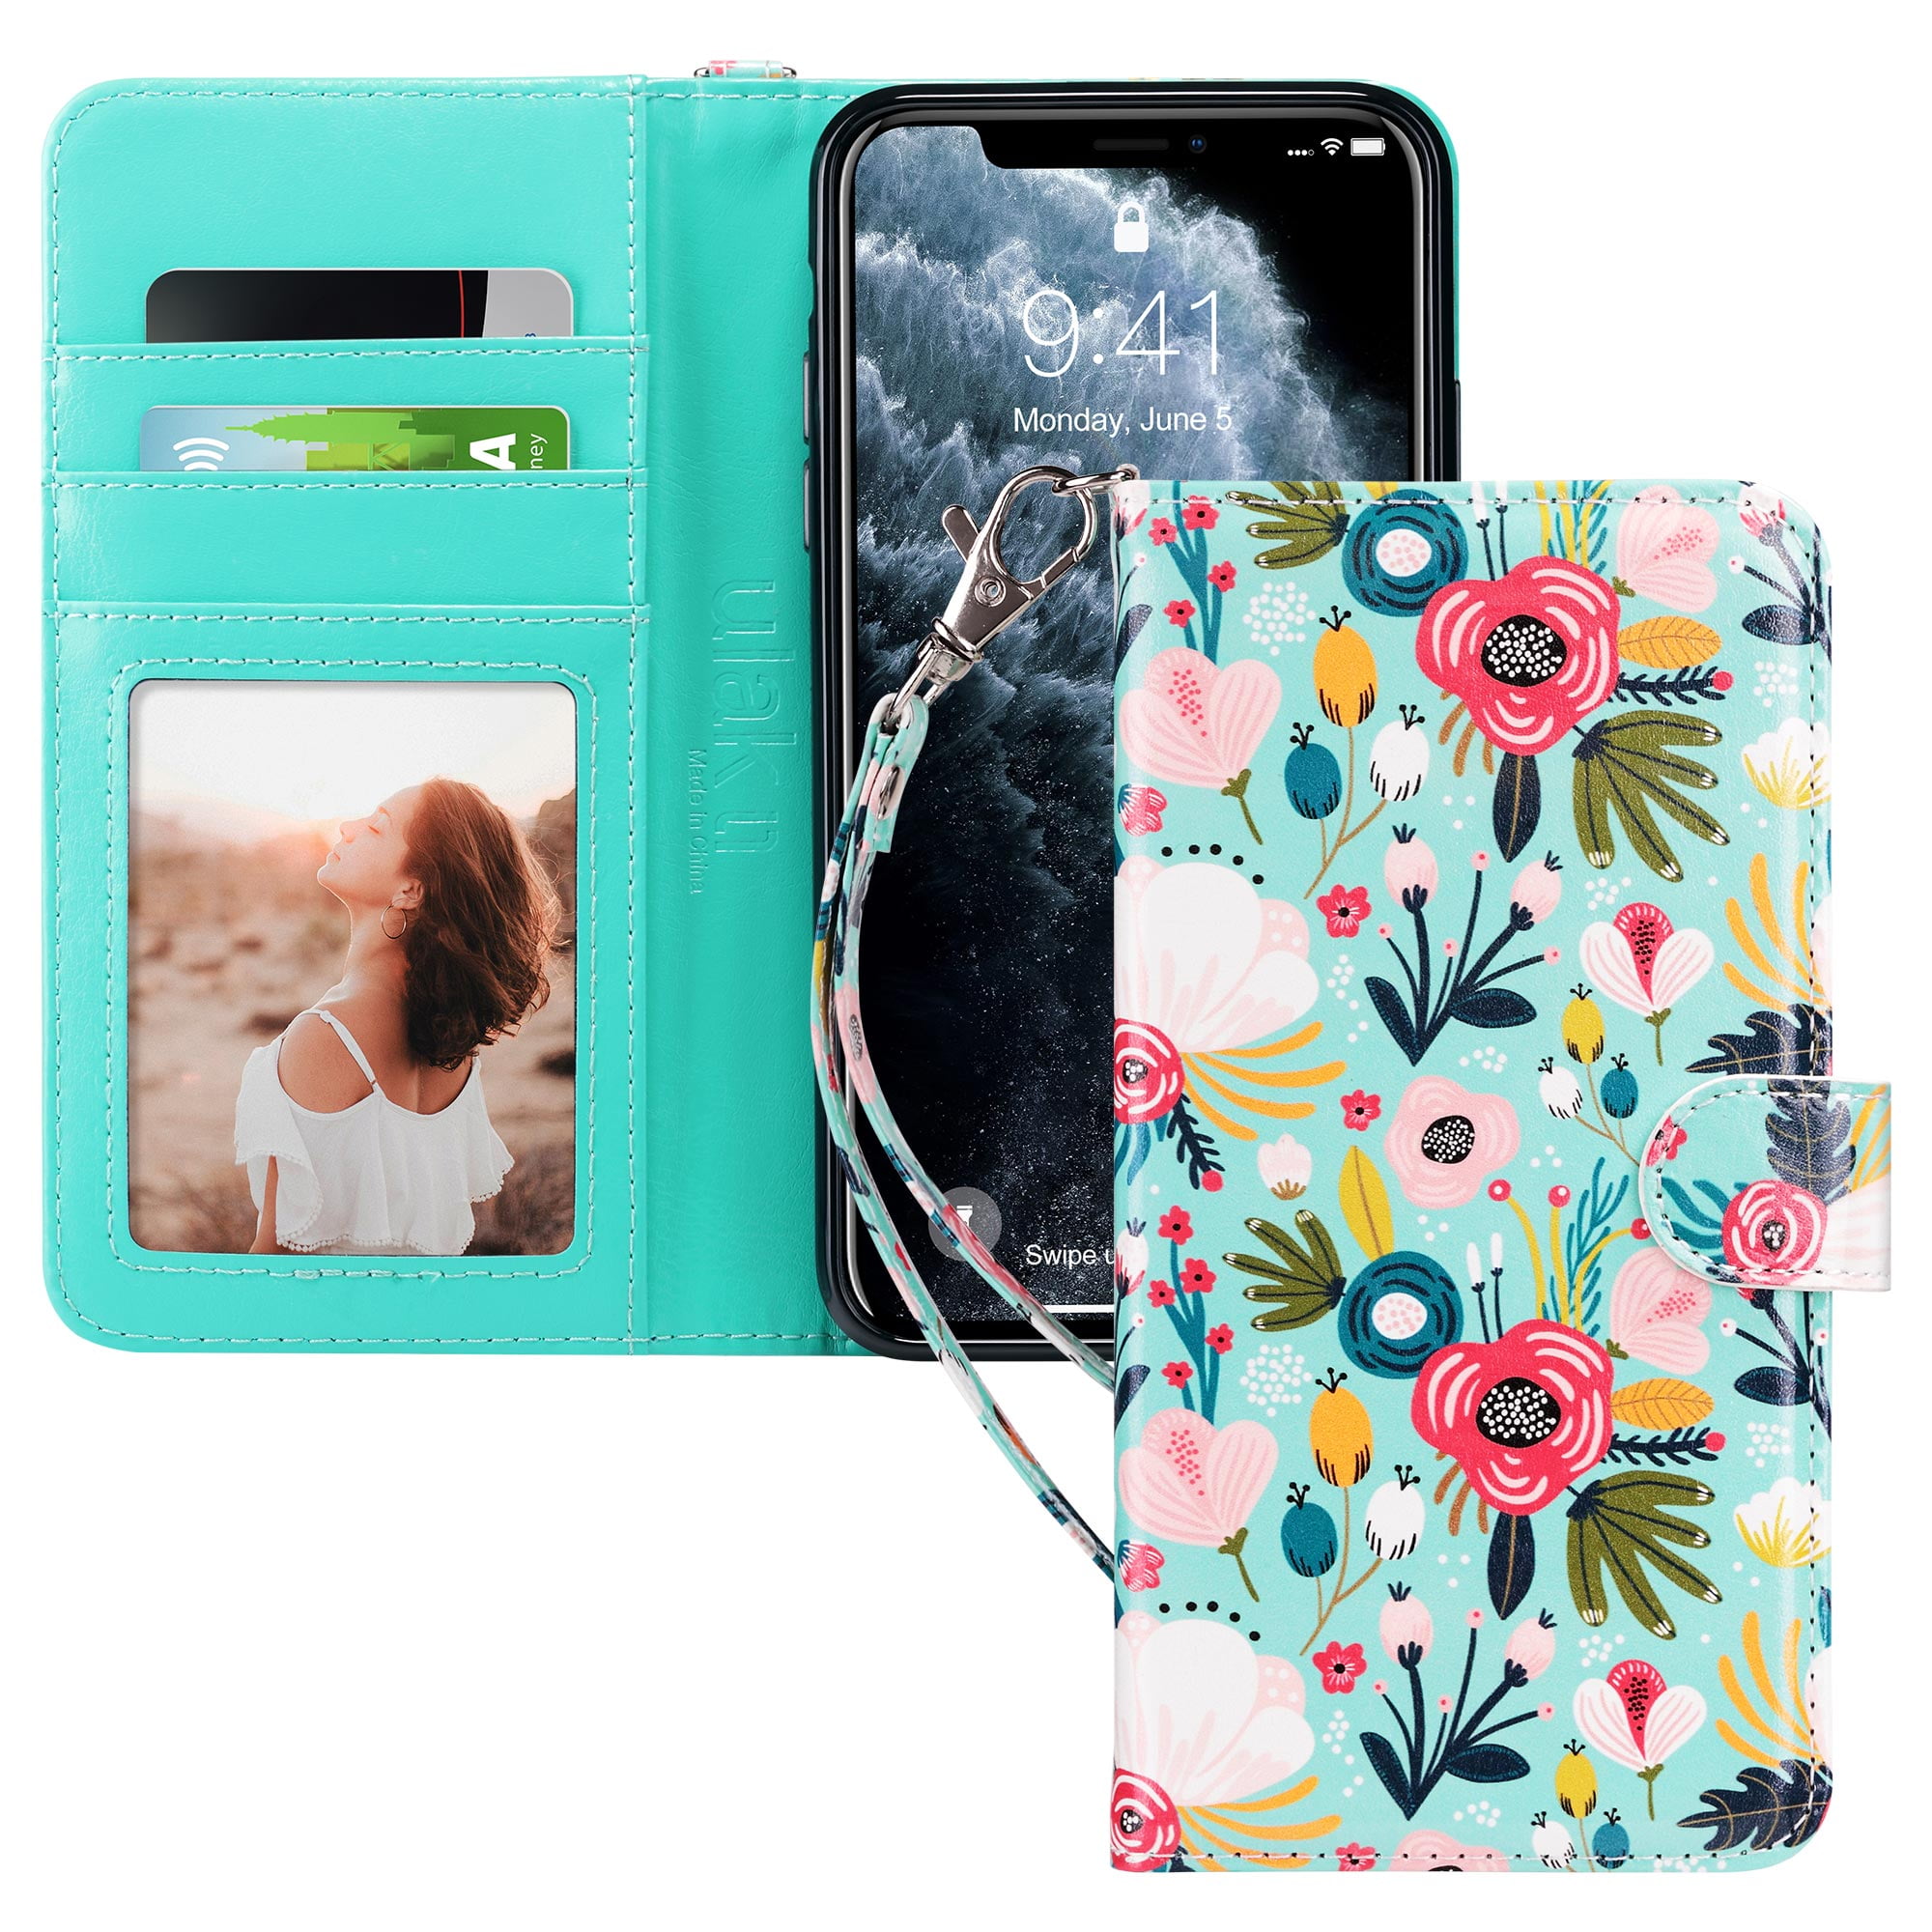 Folio Flip Protective Cover Huawei P Smart 2019 Wallet Case with Wrist Strap Magnetic Closure Foldable Stand Green Card Slot Leather Case for Huawei P Smart 2019 Embossed Cat Pattern